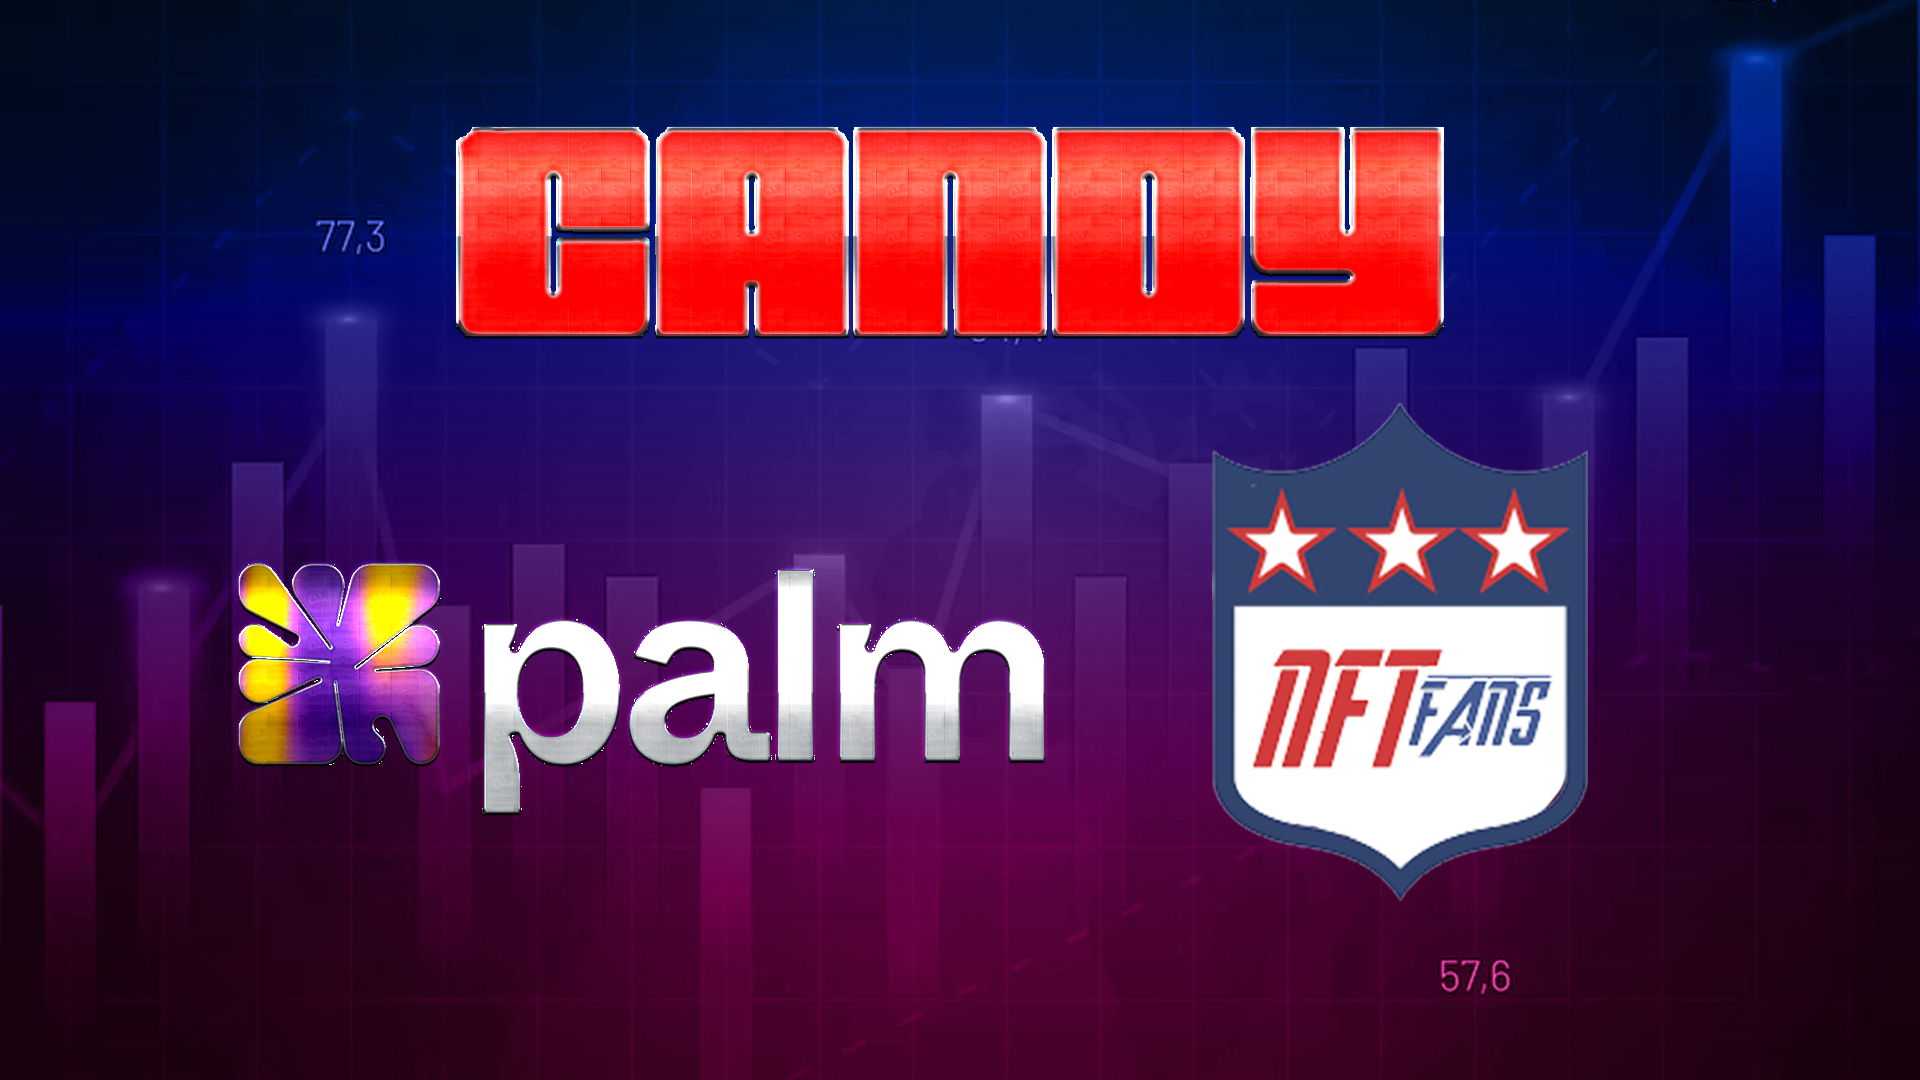 Candy Digital and Palm NFT Join Forces To Unite NFT Fans